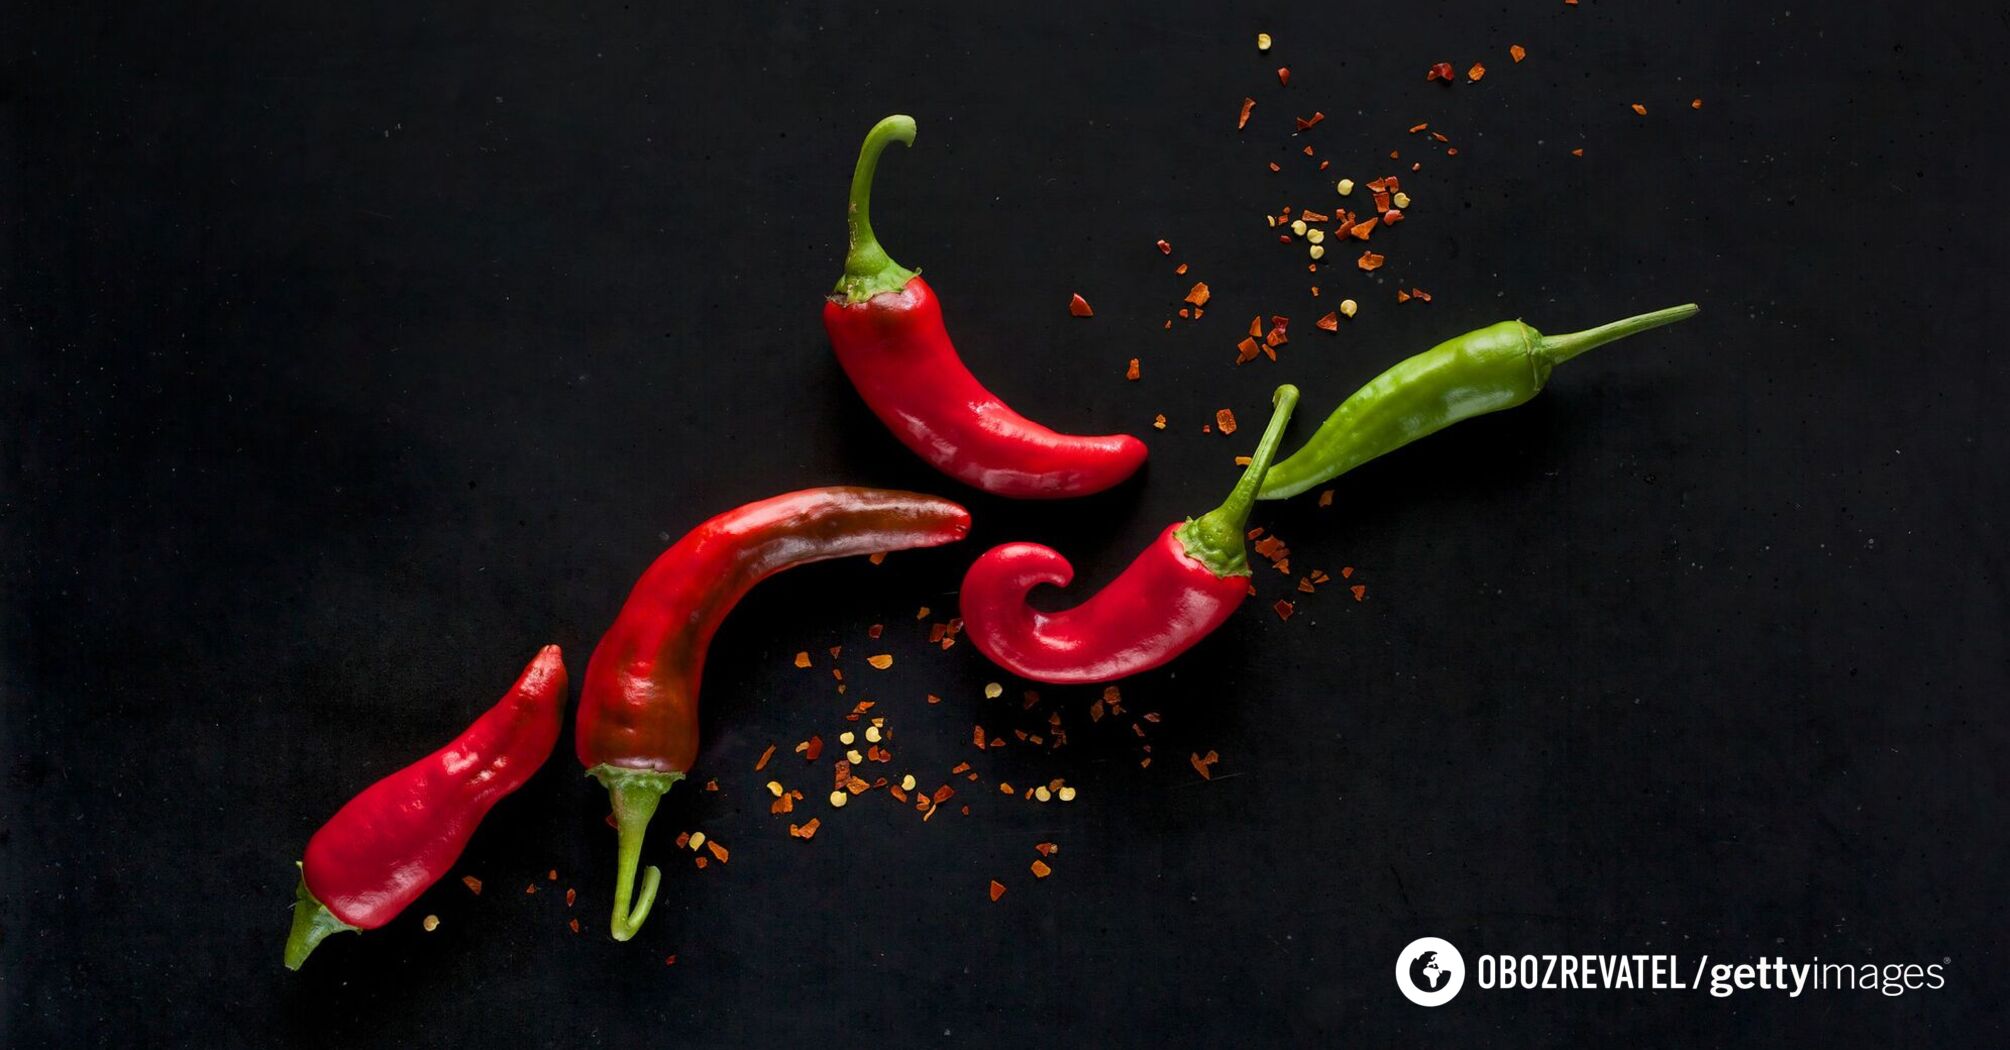 Chili peppers can inhibit the growth of cancer cells